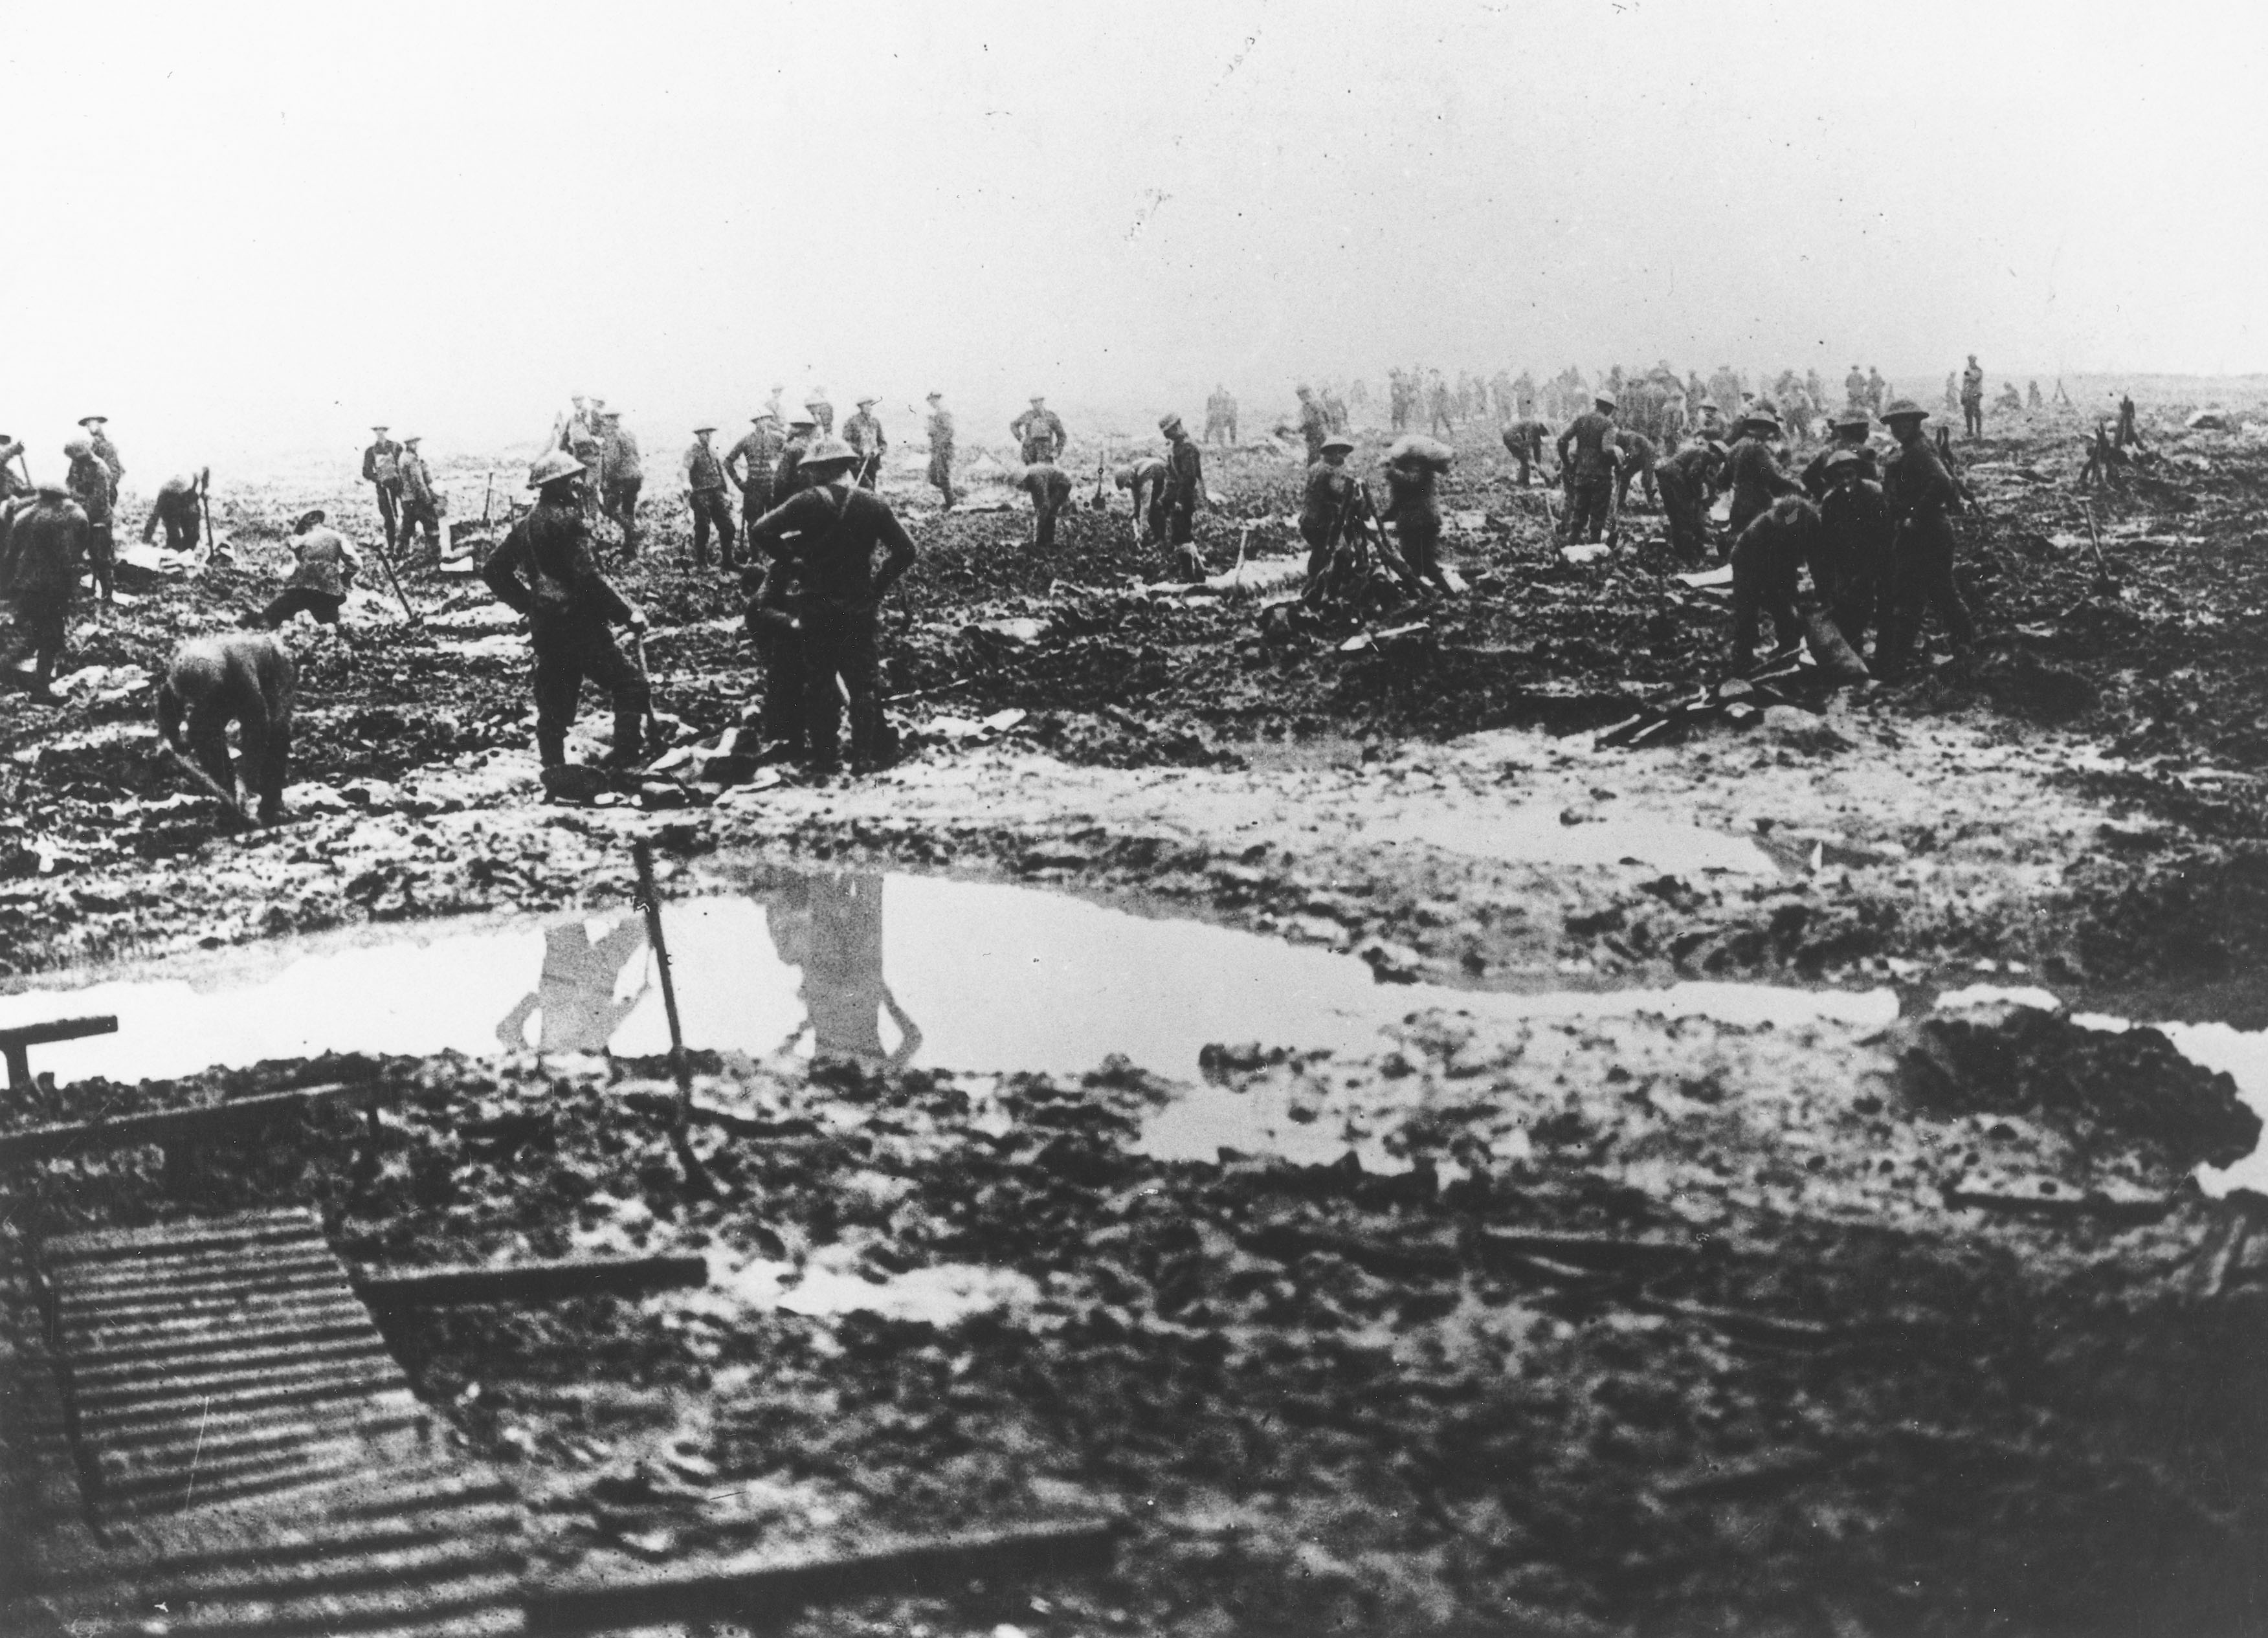 Canadian troops clearing-up after the final advance on Passchendaele